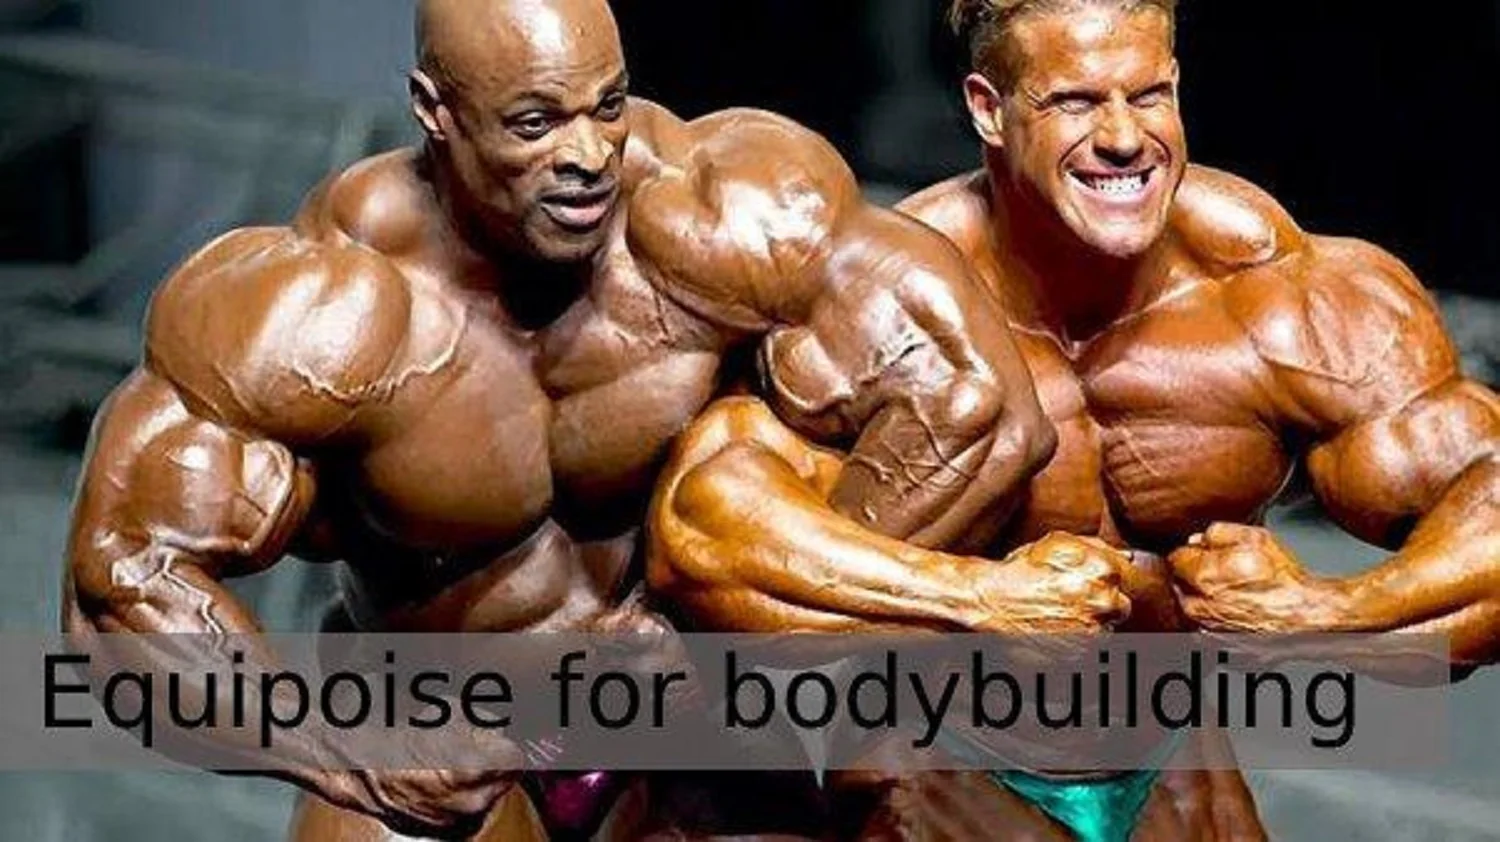 How Effective Is Equipoise for Bodybuilding